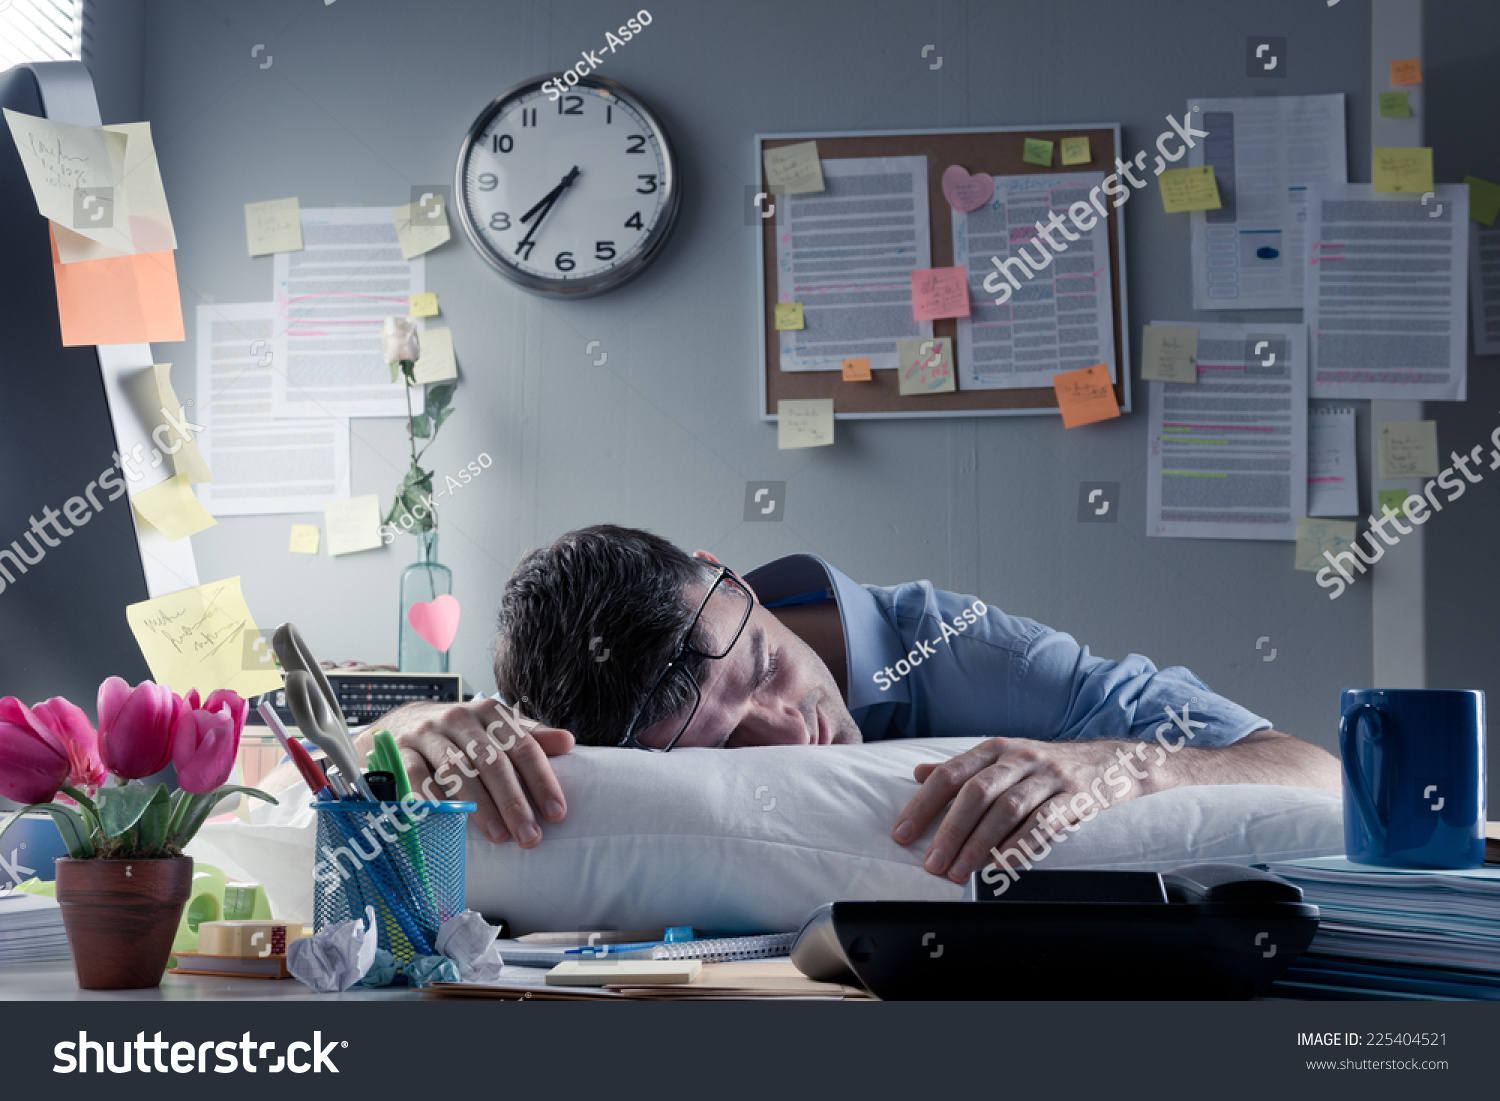 Exhausted businessman sleeping at workplace with a pillow on his desk. #225404521